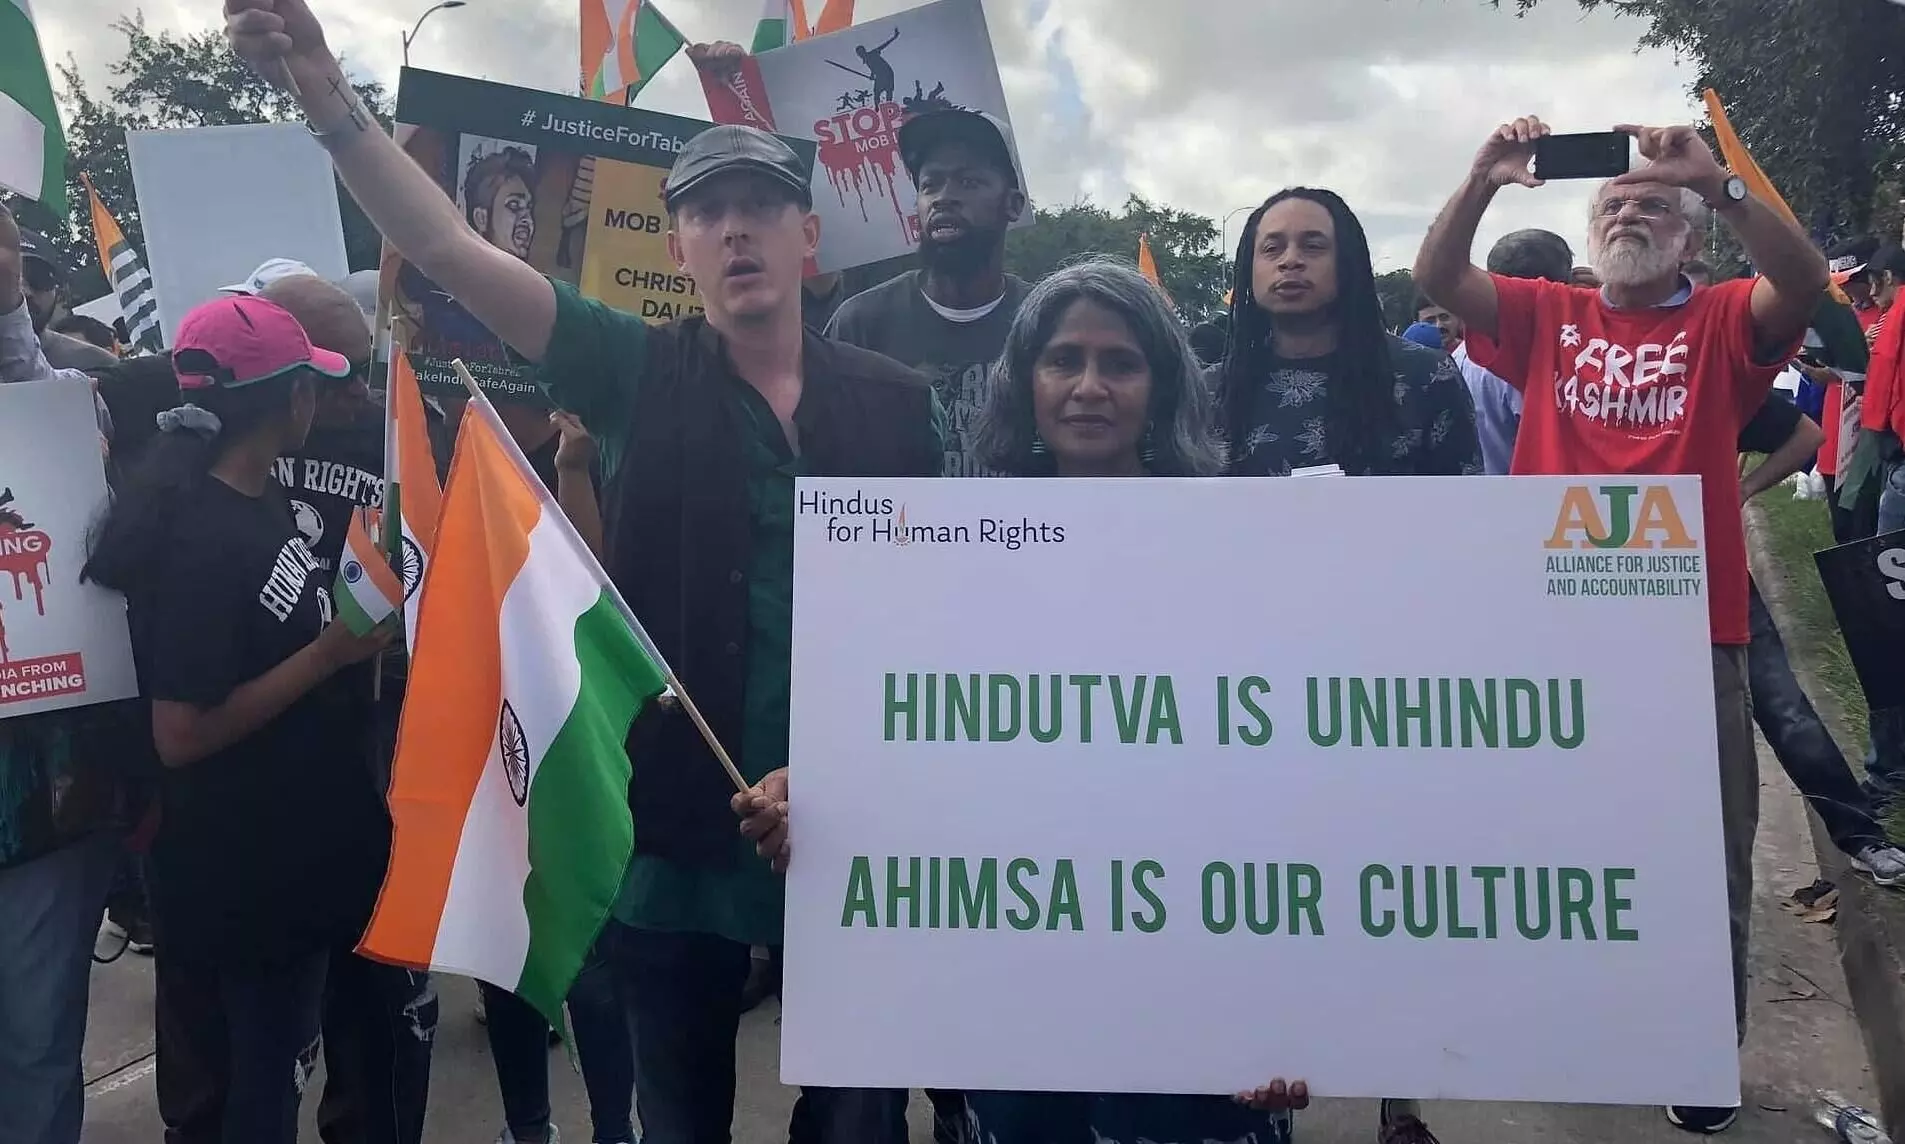 Over 100 Civil Society groups sound alarm on growing Hindutva influence in US